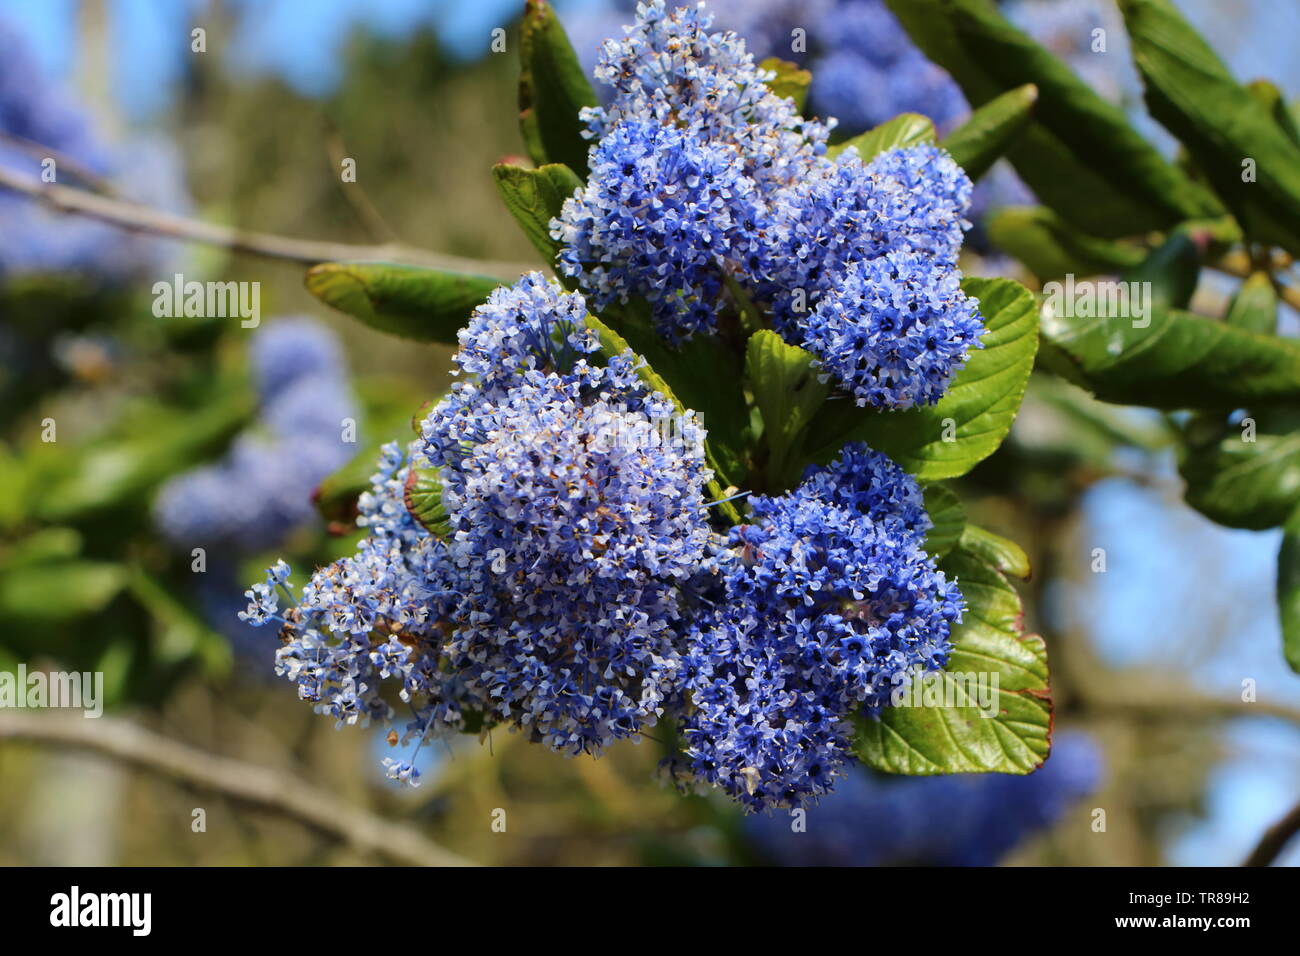 Blue ceanothus flowers in a garden during spring Stock Photo